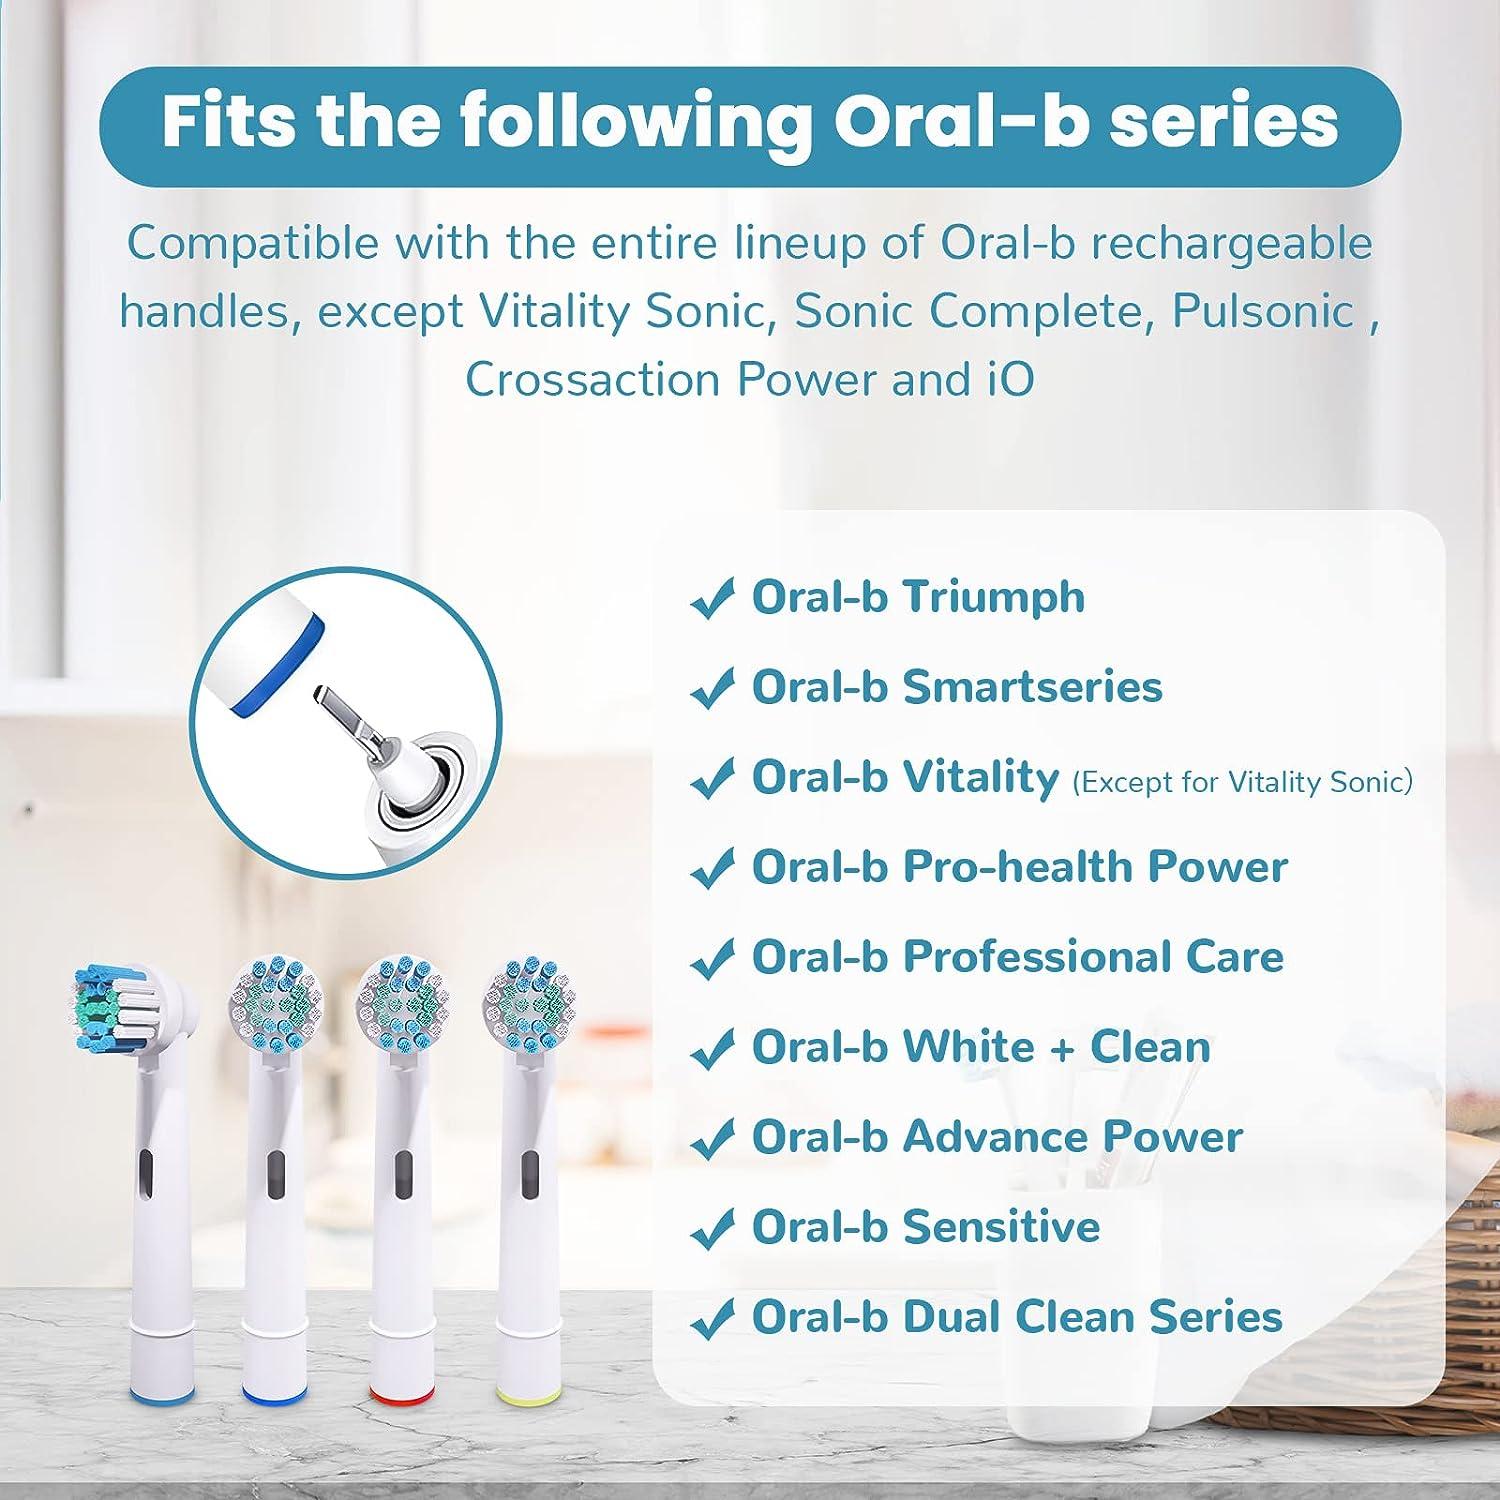 Oral-B Pro 500 CrossAction electric toothbrush